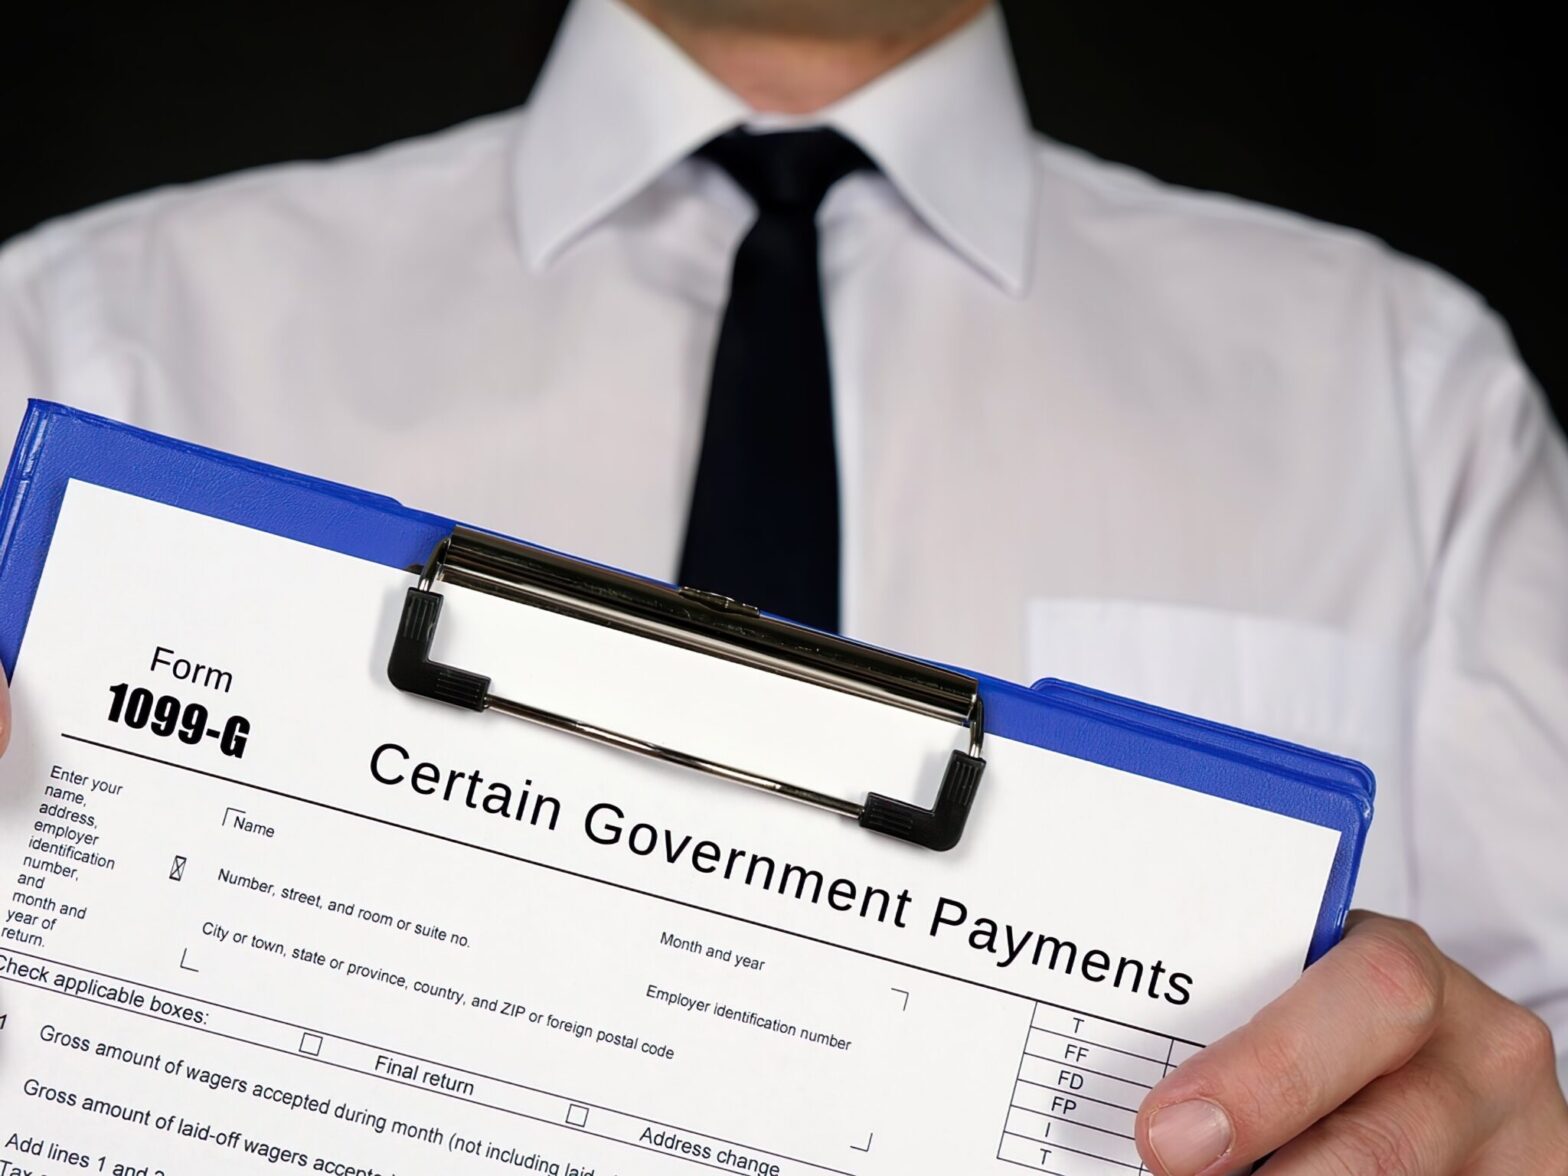 Certain Government Payments